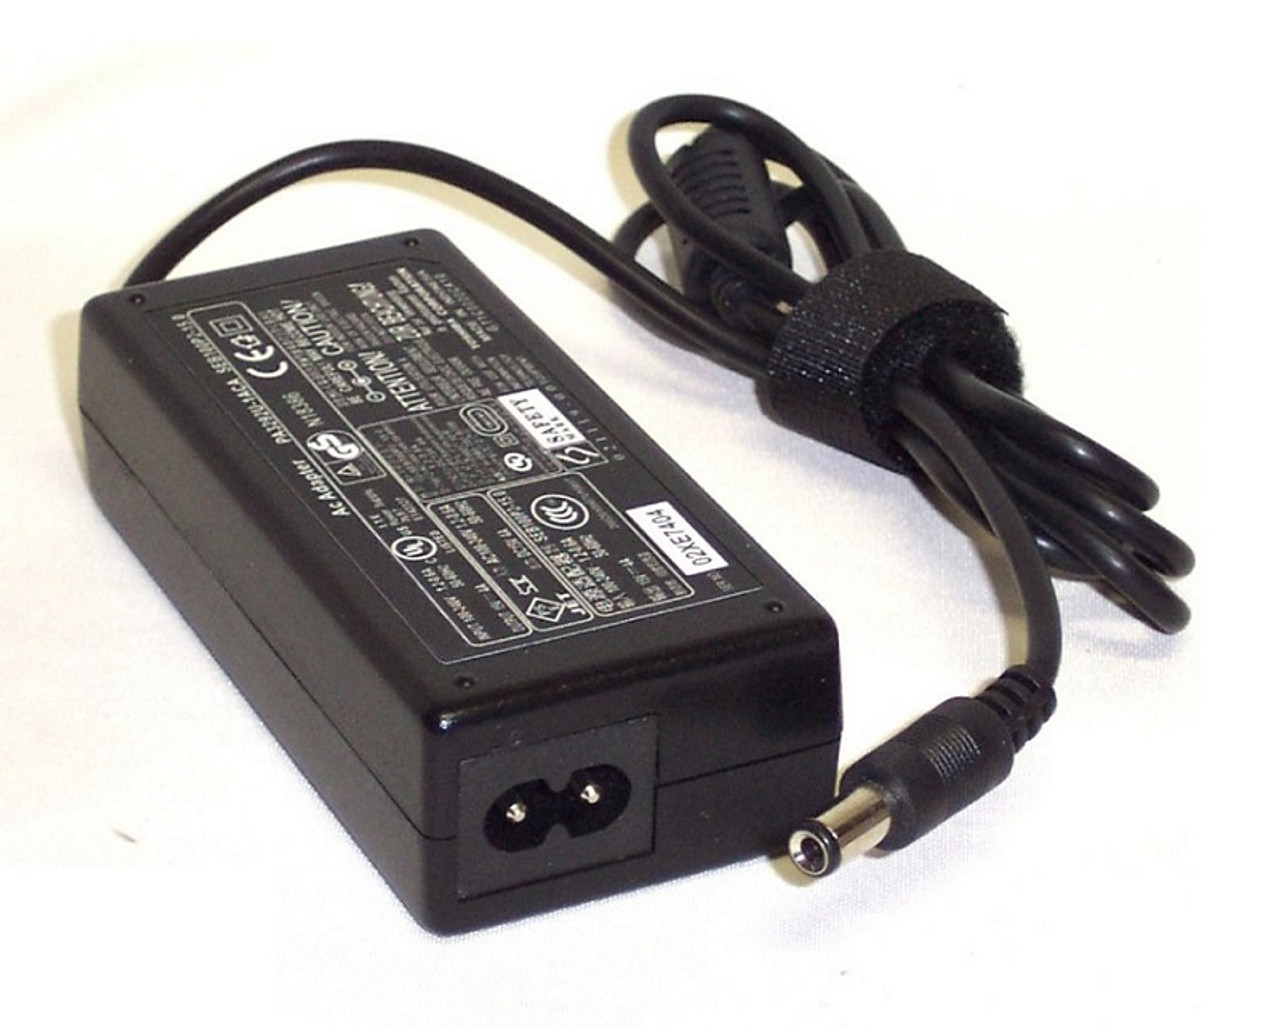 0W1848 - Dell 130-Watts Slim AC Adapter for Inspiron 5150